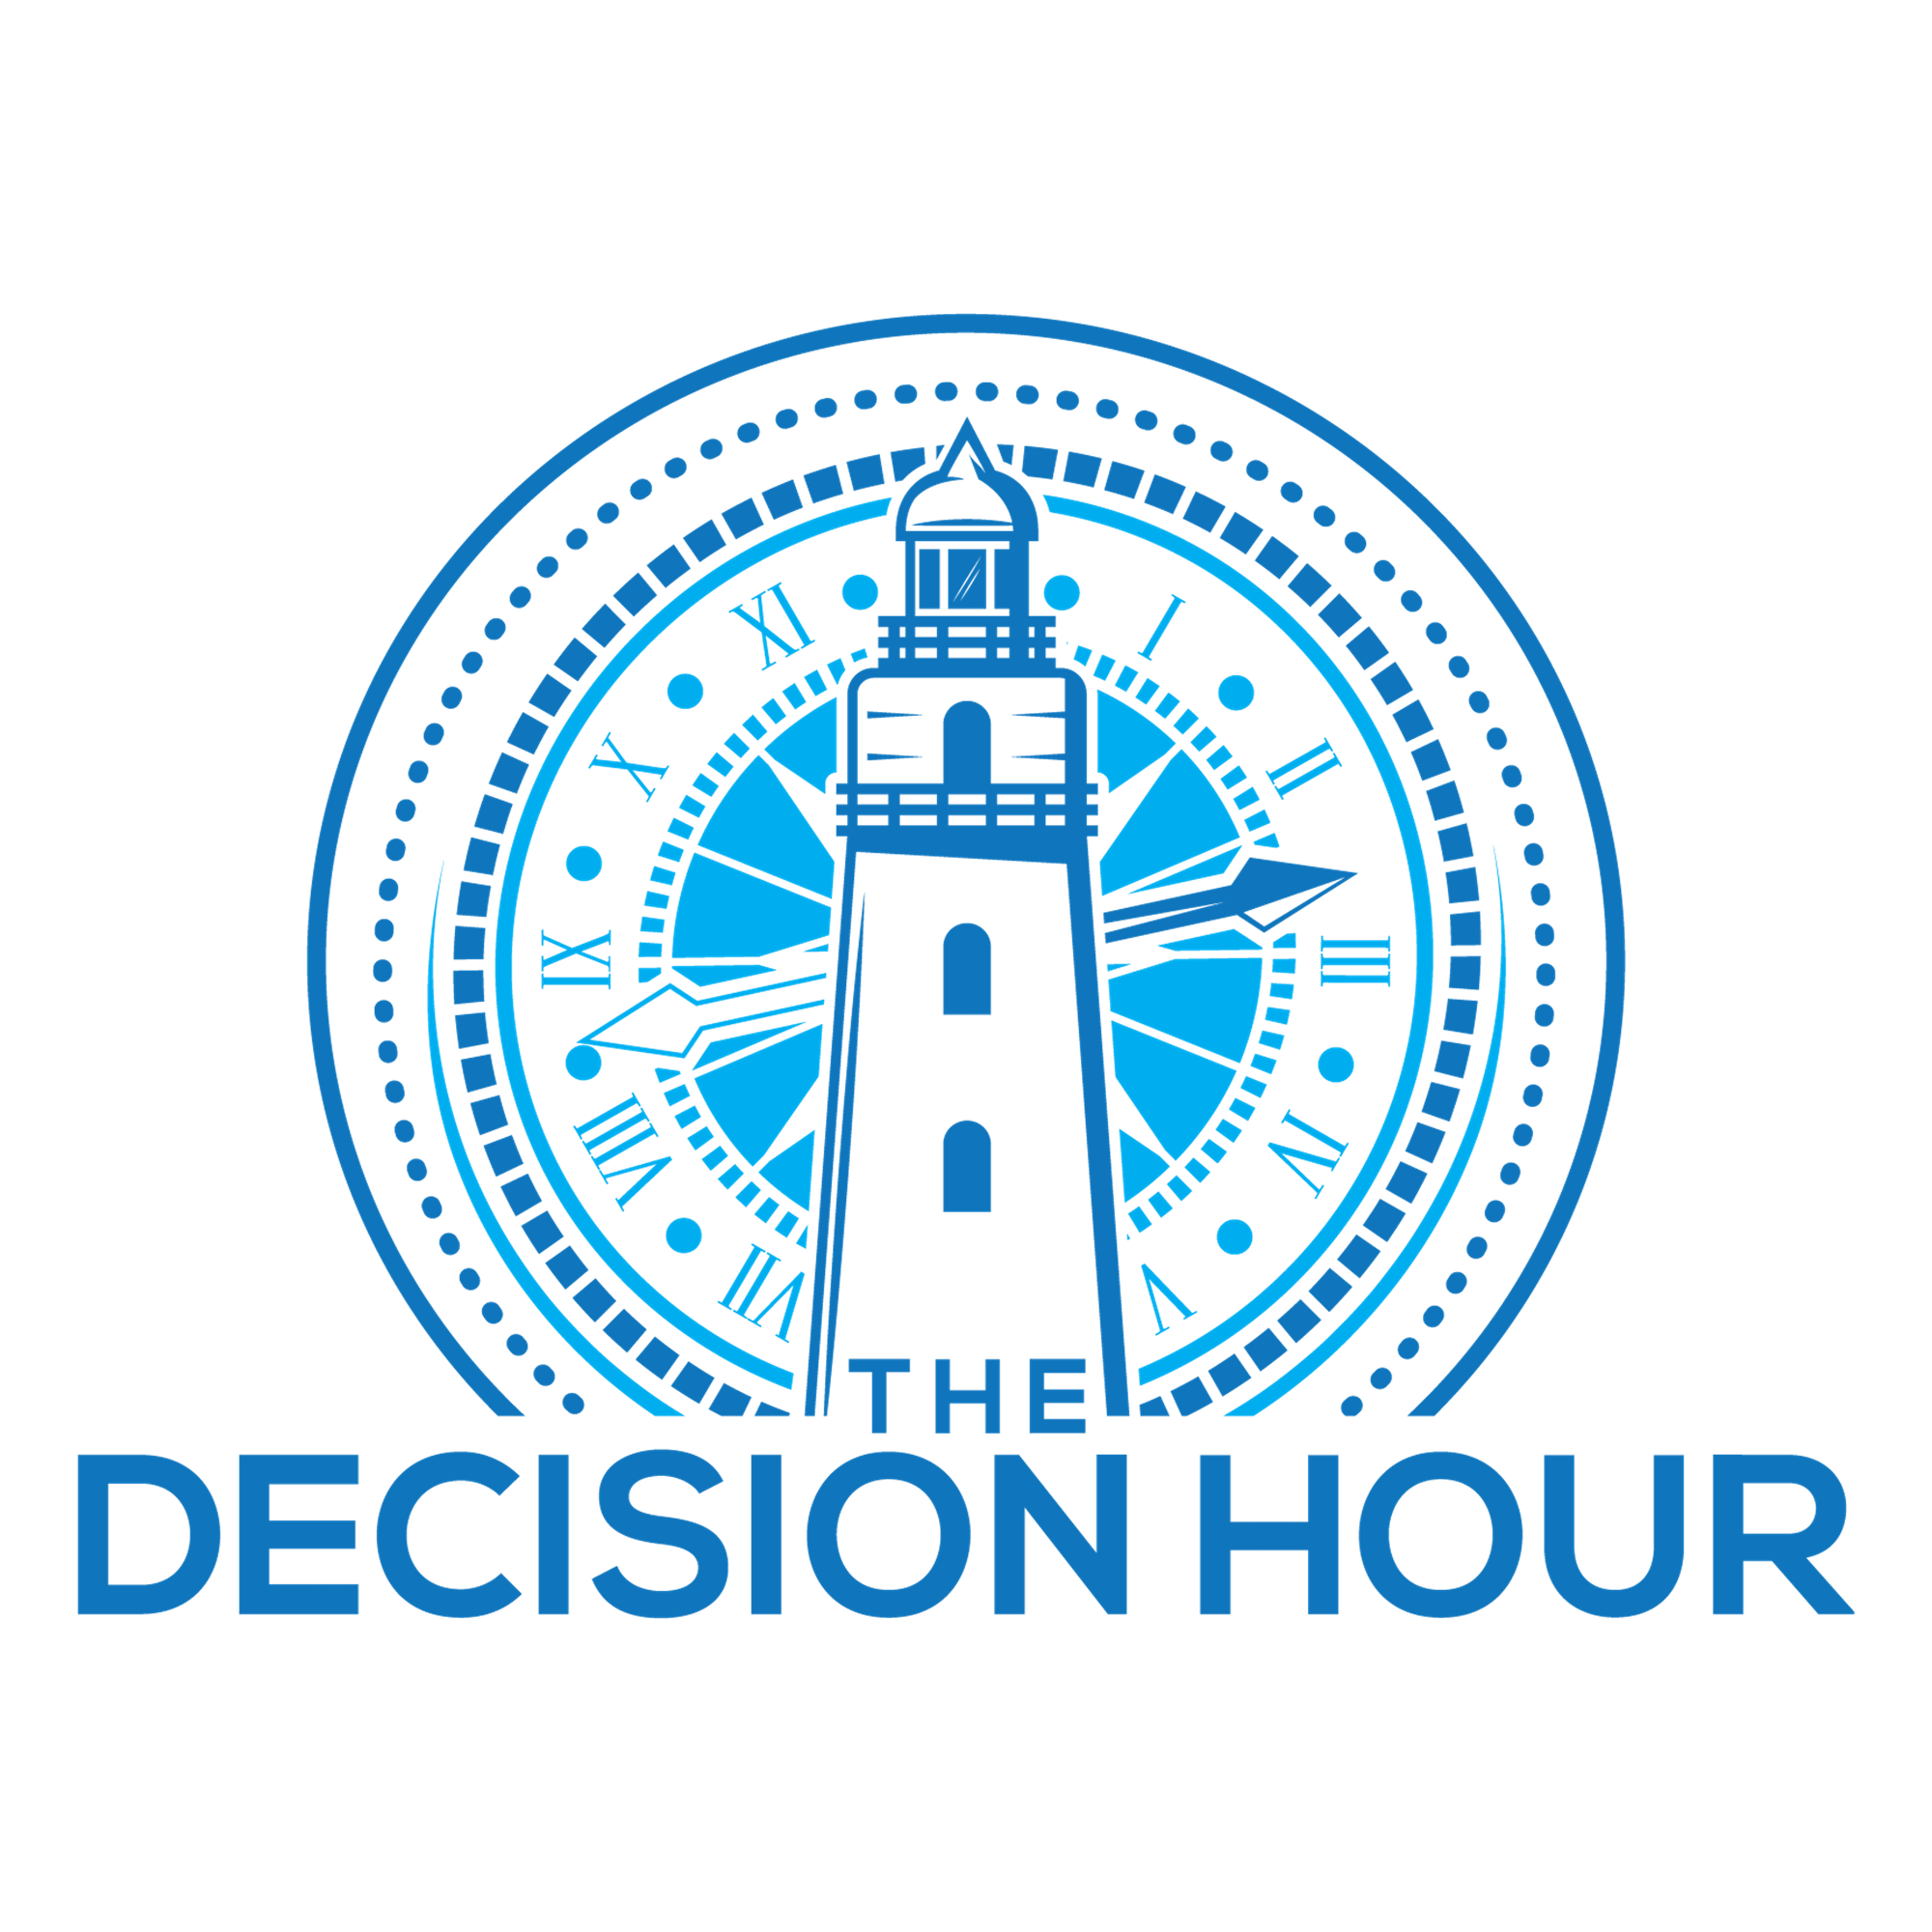 The Decision Hour